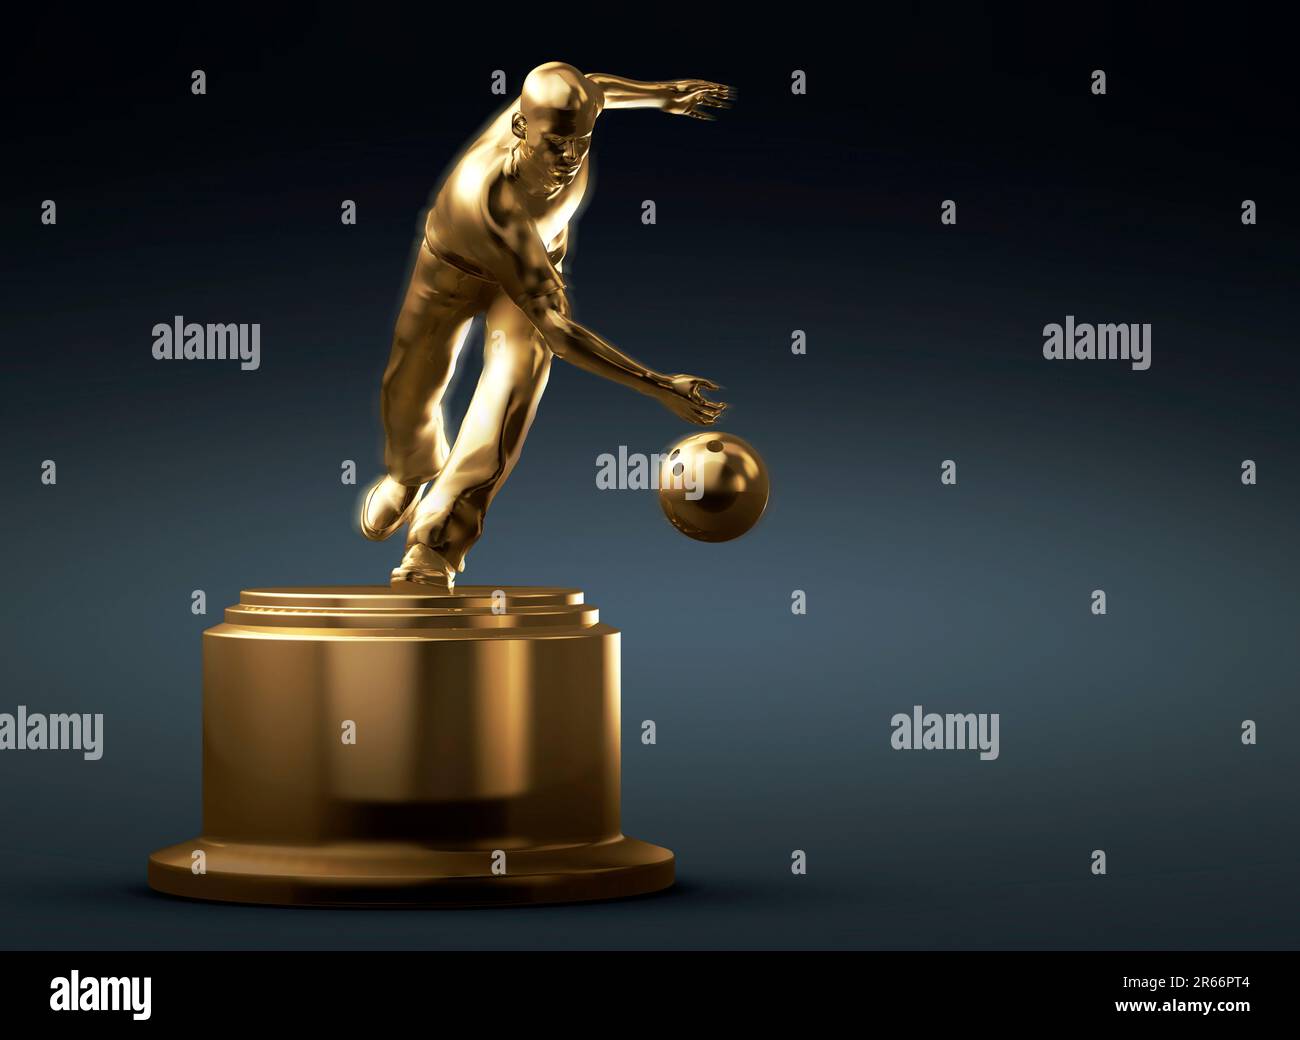 Gold Statue of a Bowling bowler Stock Photo